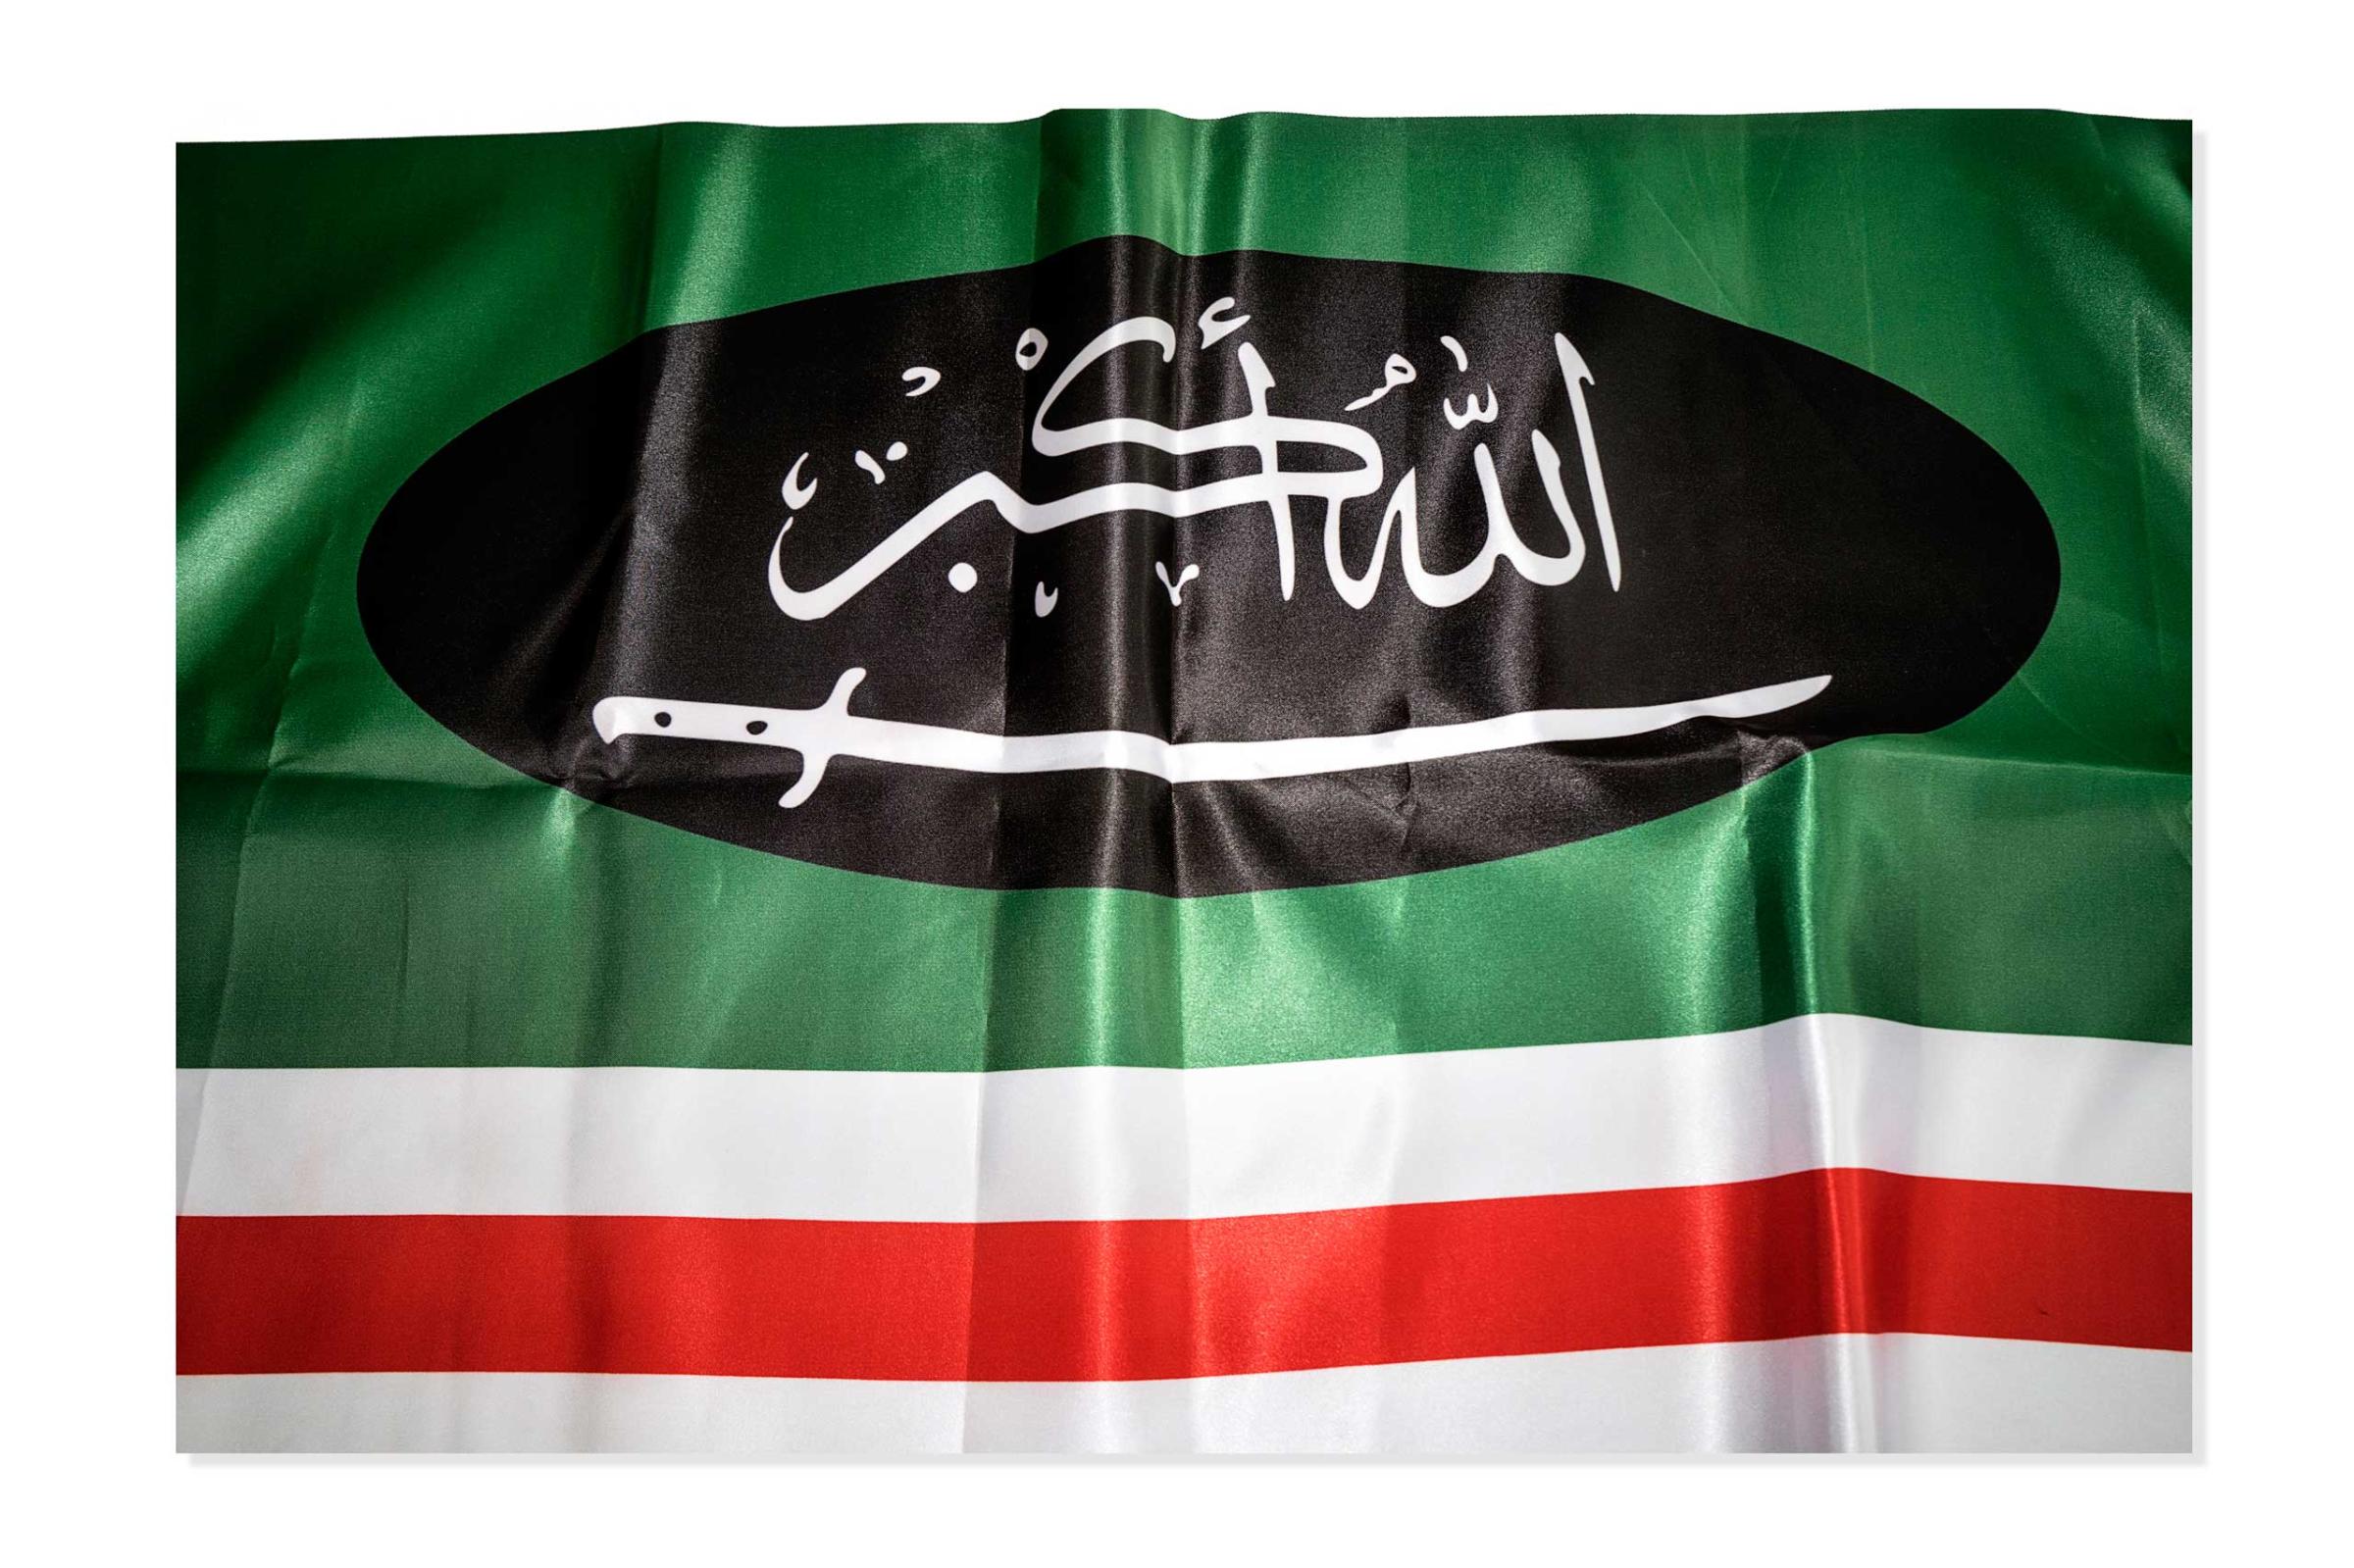 The Caucasus Emirate Flag. A modified version of the one used by the unrecognized seccessionitst government of the chechen republic of Ichkeria was elected in 1991 but replaced by the caucaus Emirate in 2007.